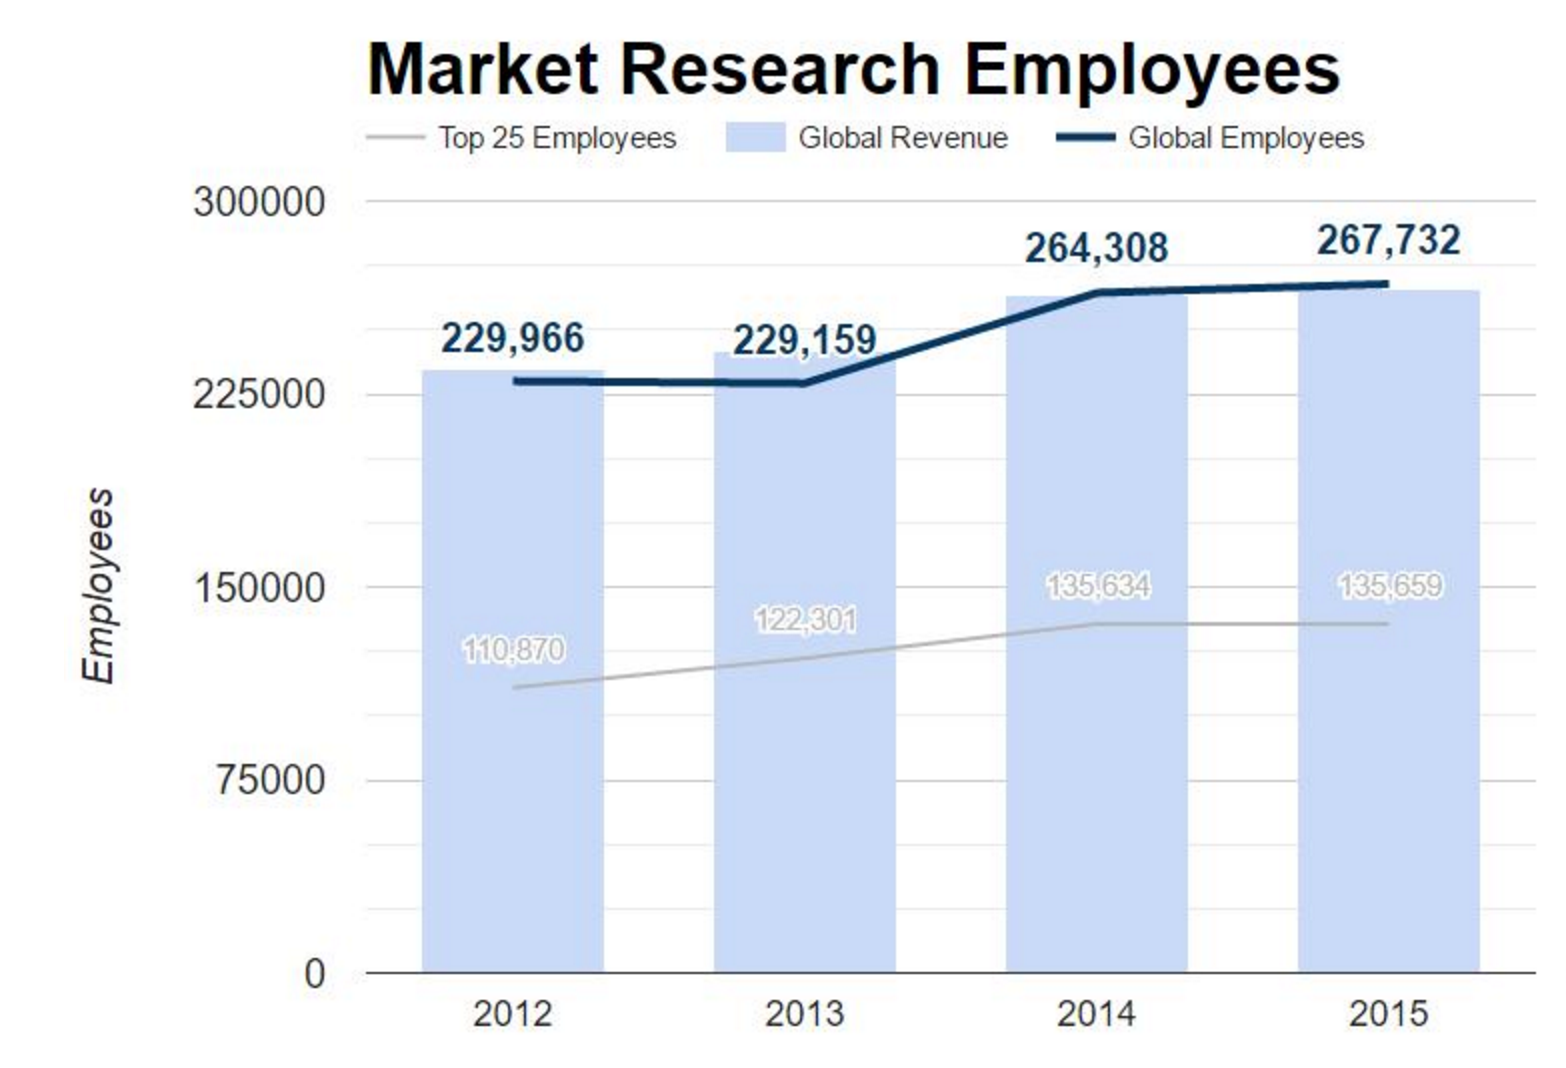 Market Research Employees World-Wide